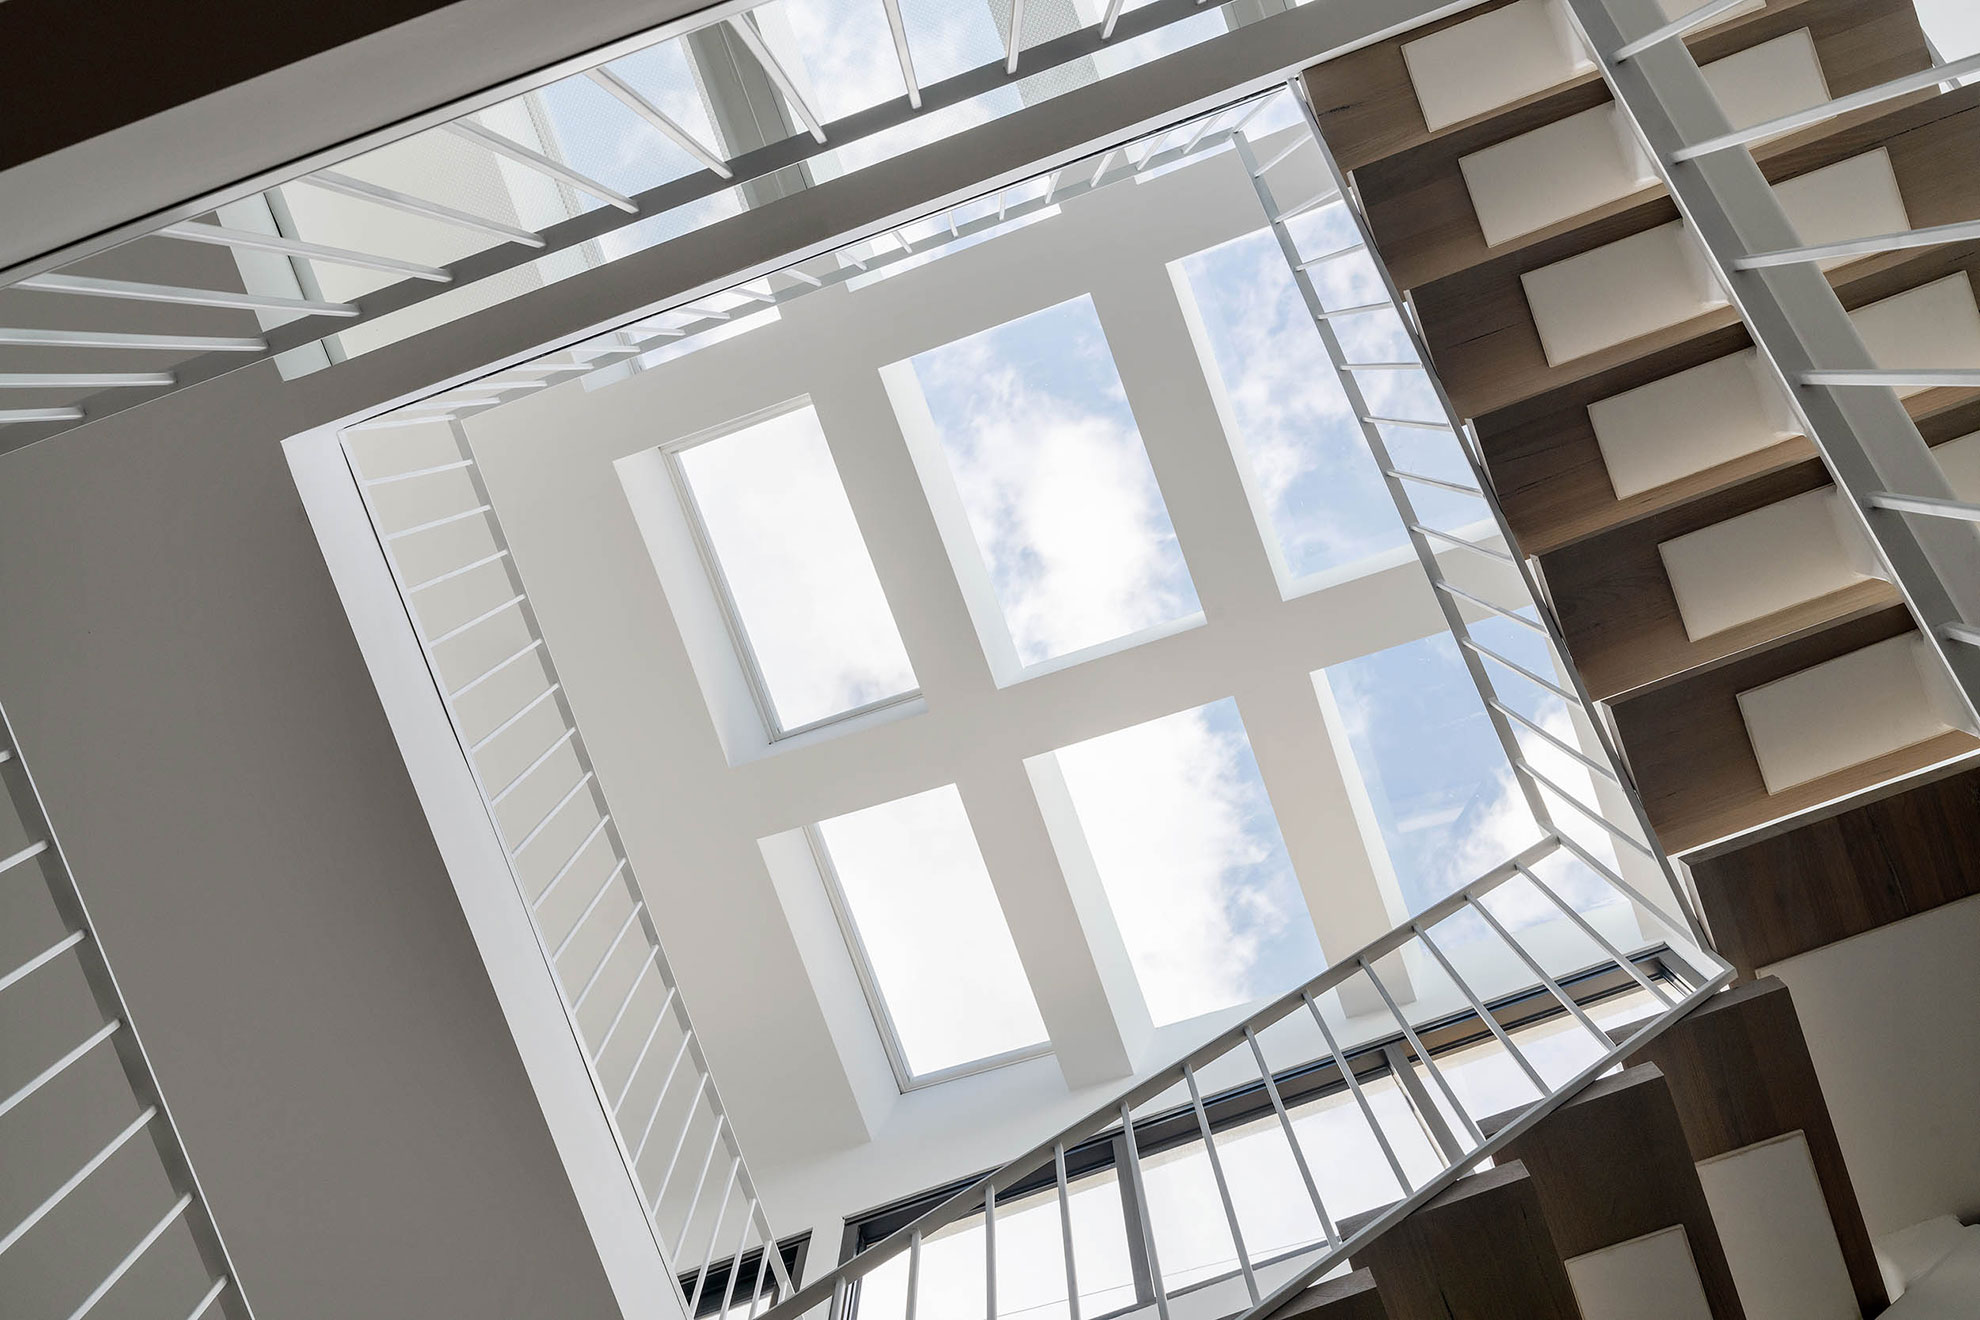 glass-ceiling-skylights-internal-staircase